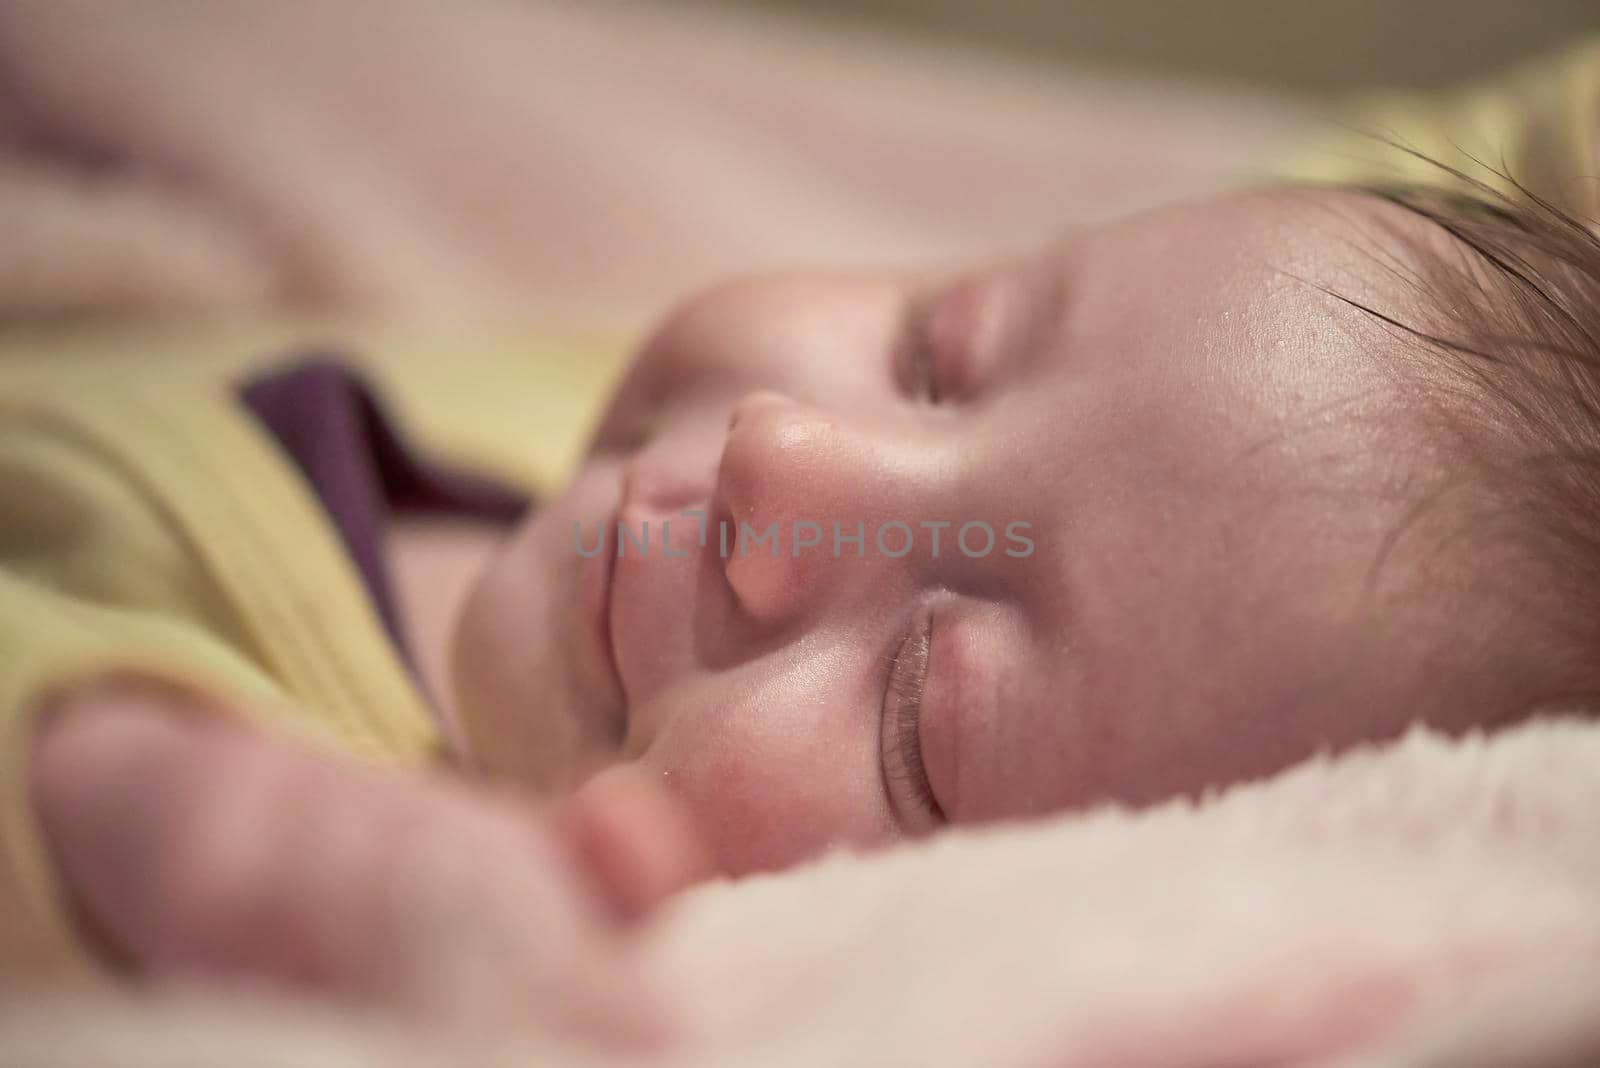 newborn baby girl sleeping in bed at home